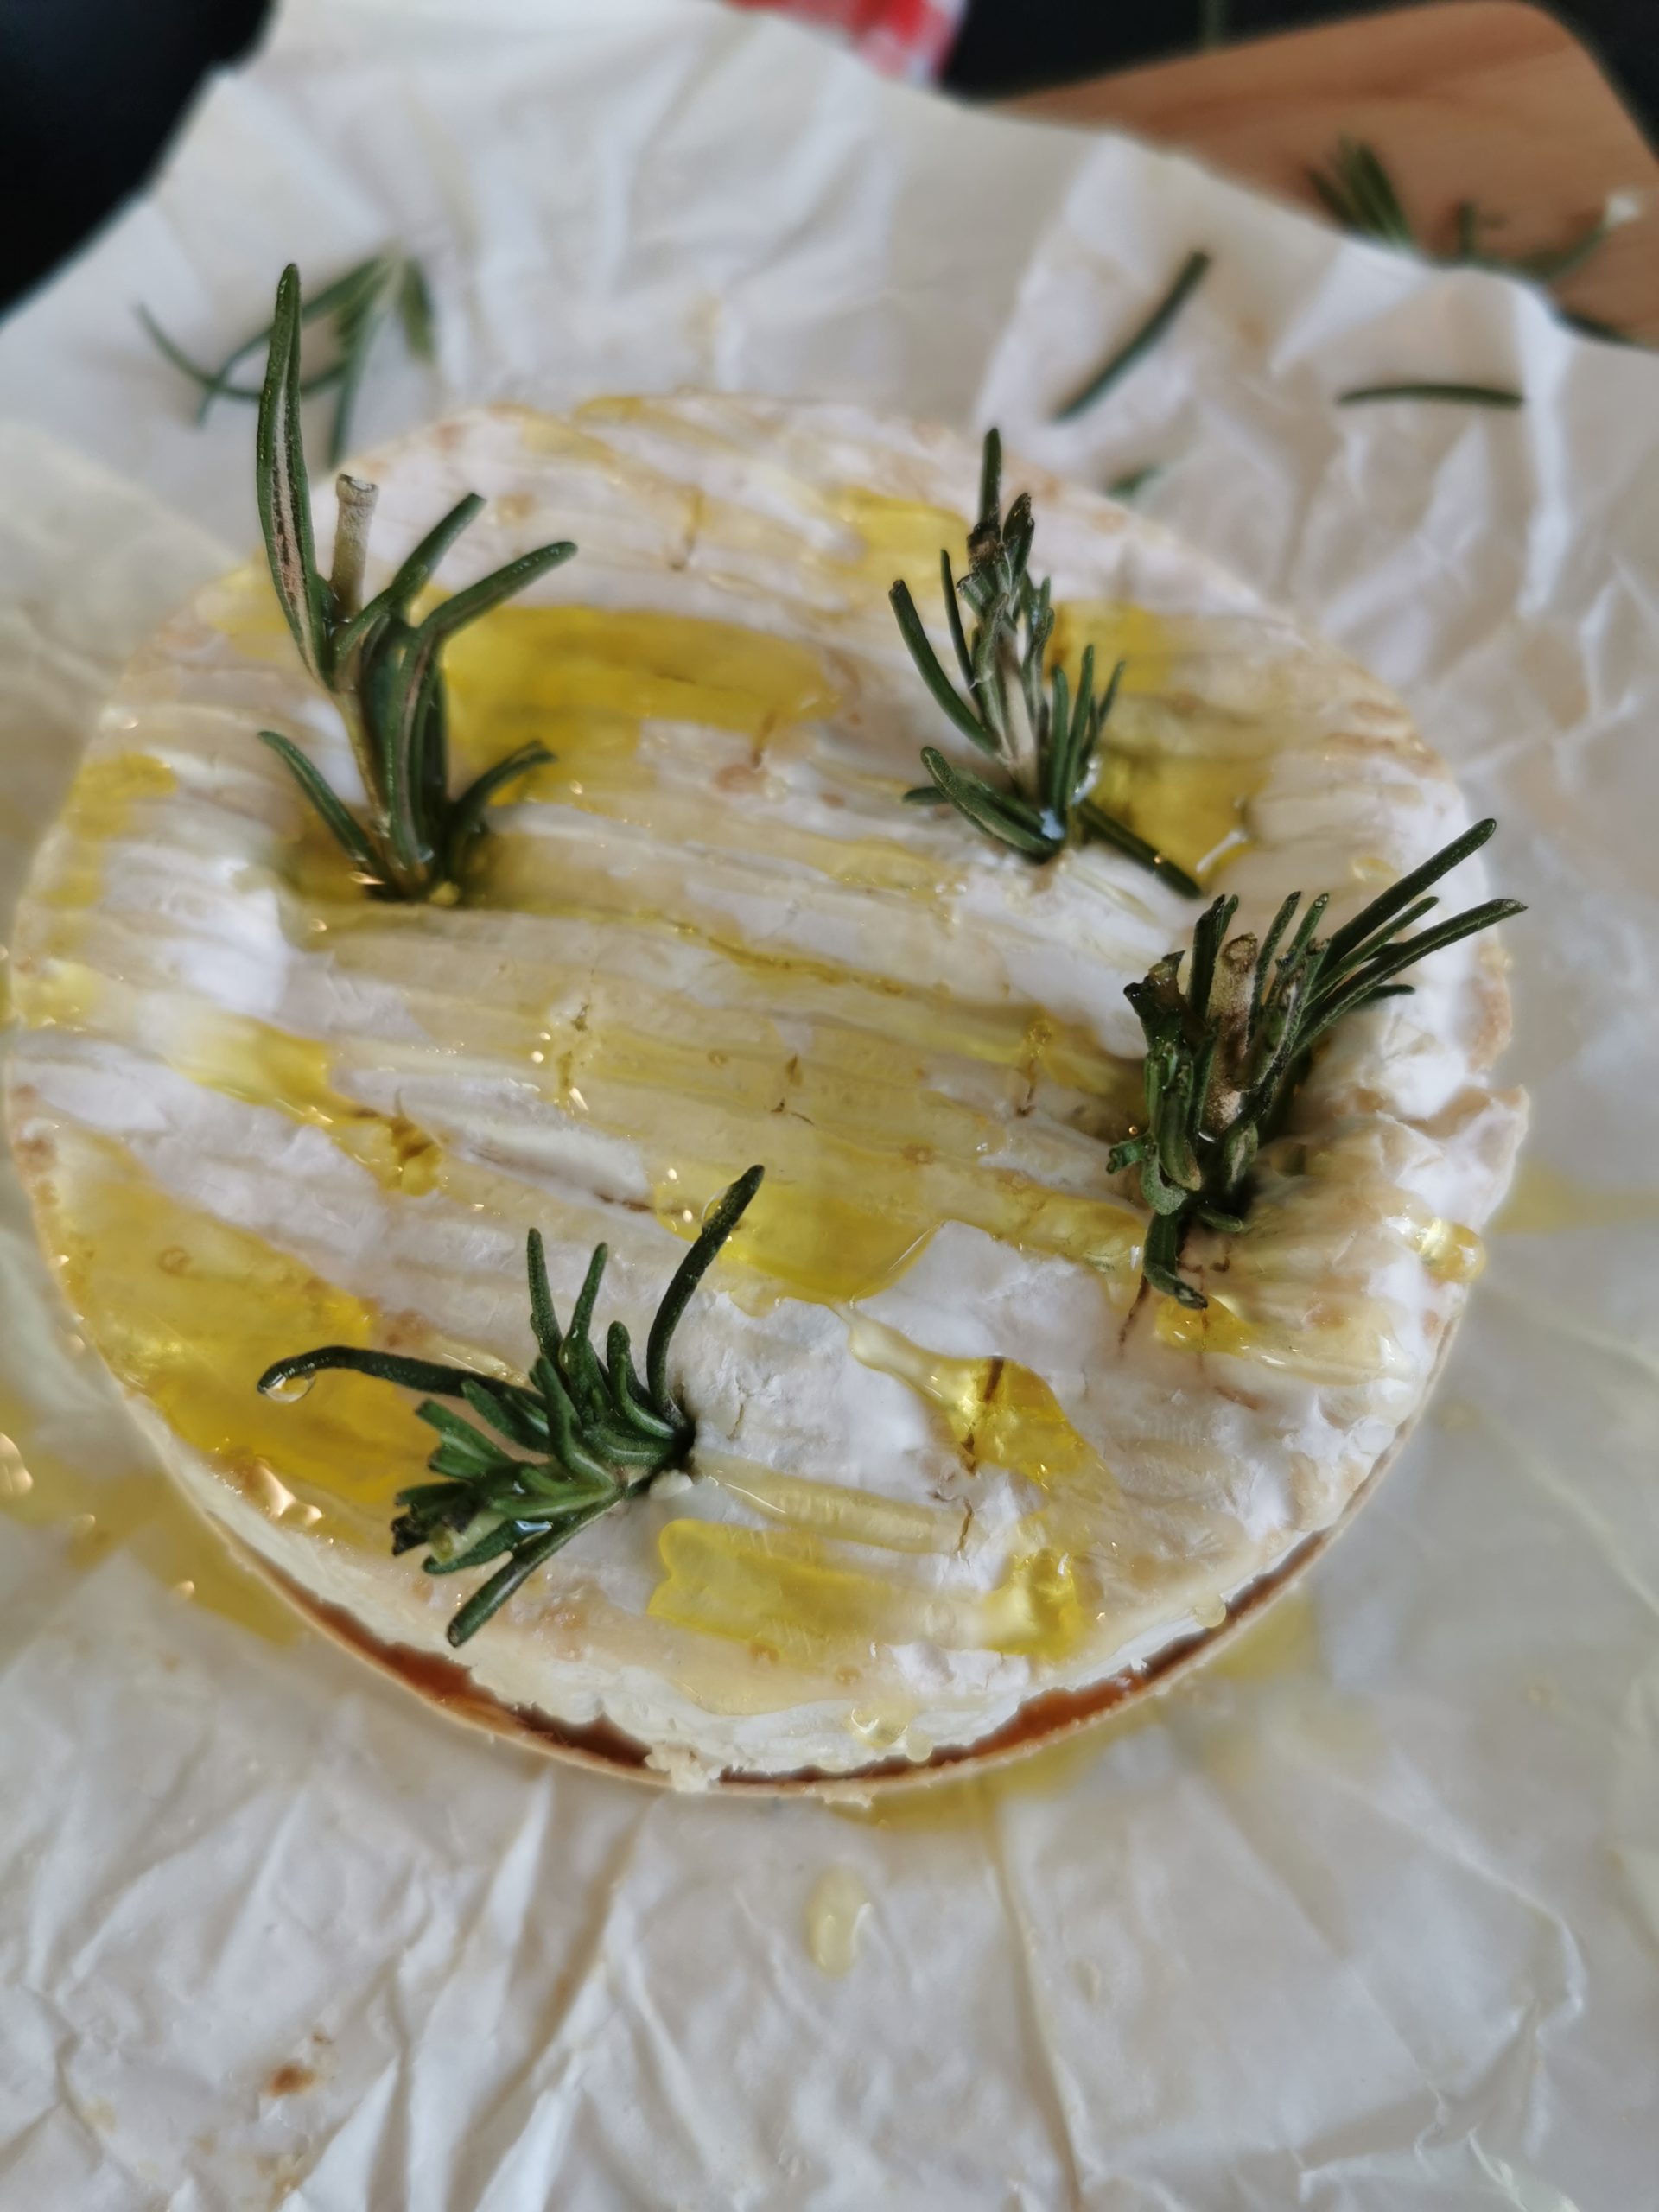 A whole Camembert cheese drizzled with olive oil and studded with fresh rosemary sprigs